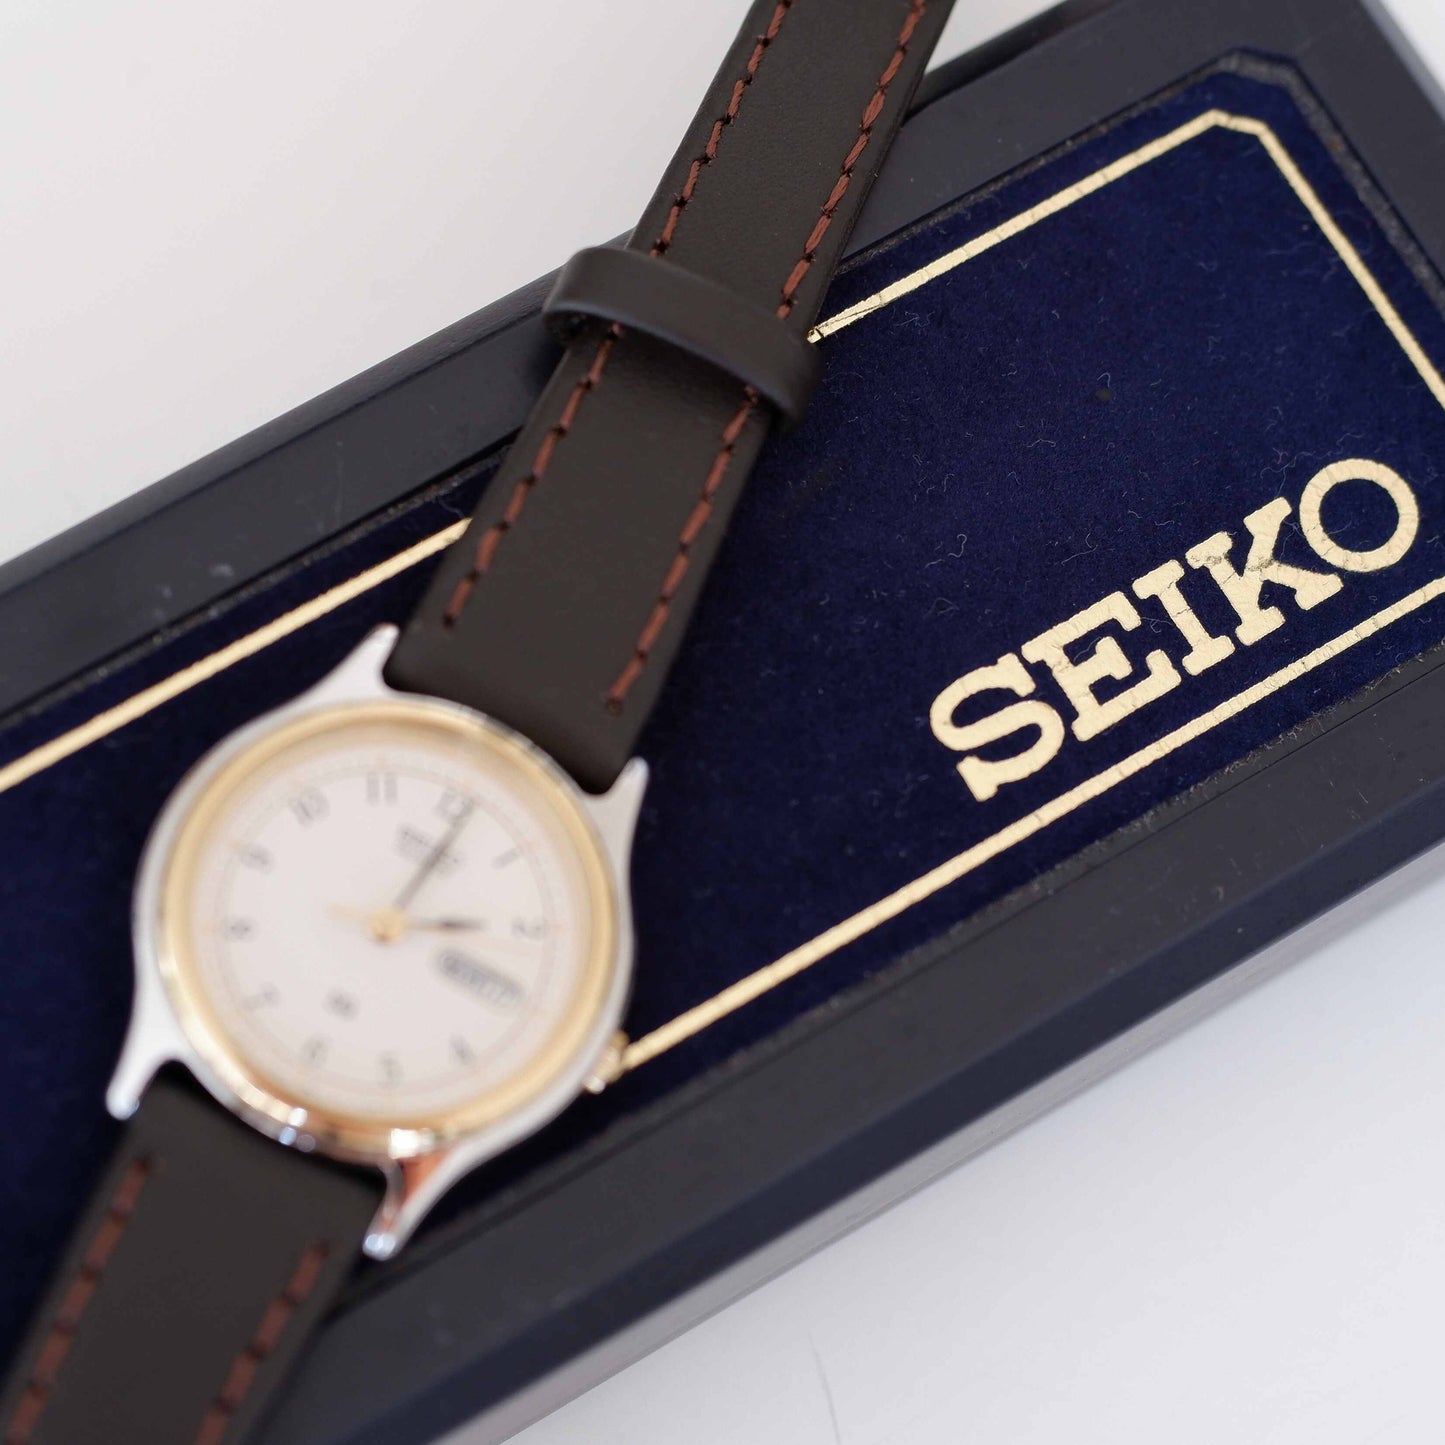 Seiko Vintage Ladies Watch: 80s Two-Tone Gold Classic Dial | Packaging